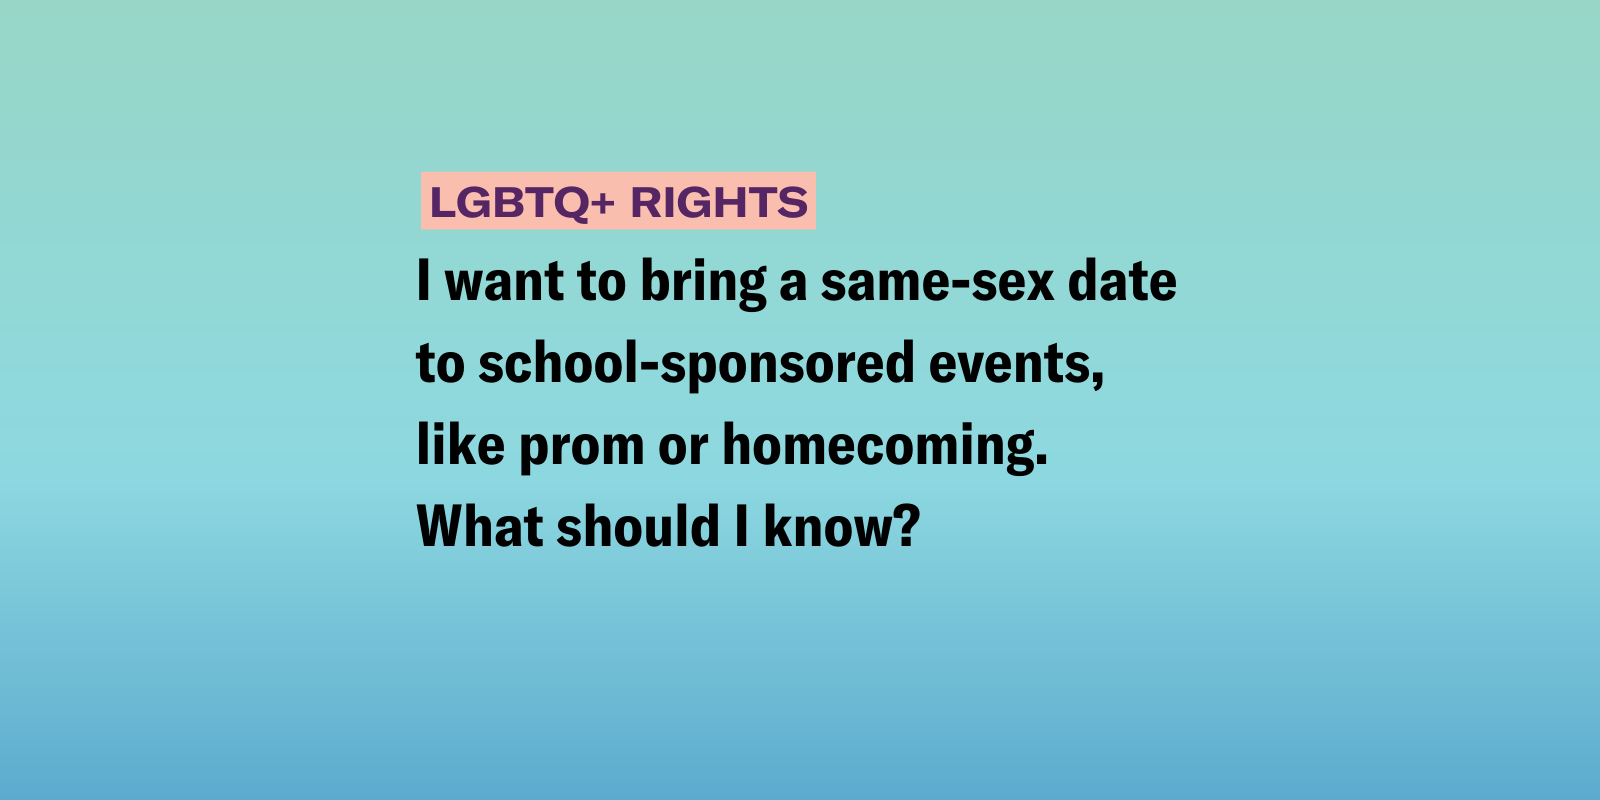 Gradient background of green, blue, and purple with the following text "I want to bring a same-sex date to school-sponsored events, like prom or homecoming. What should I know? "